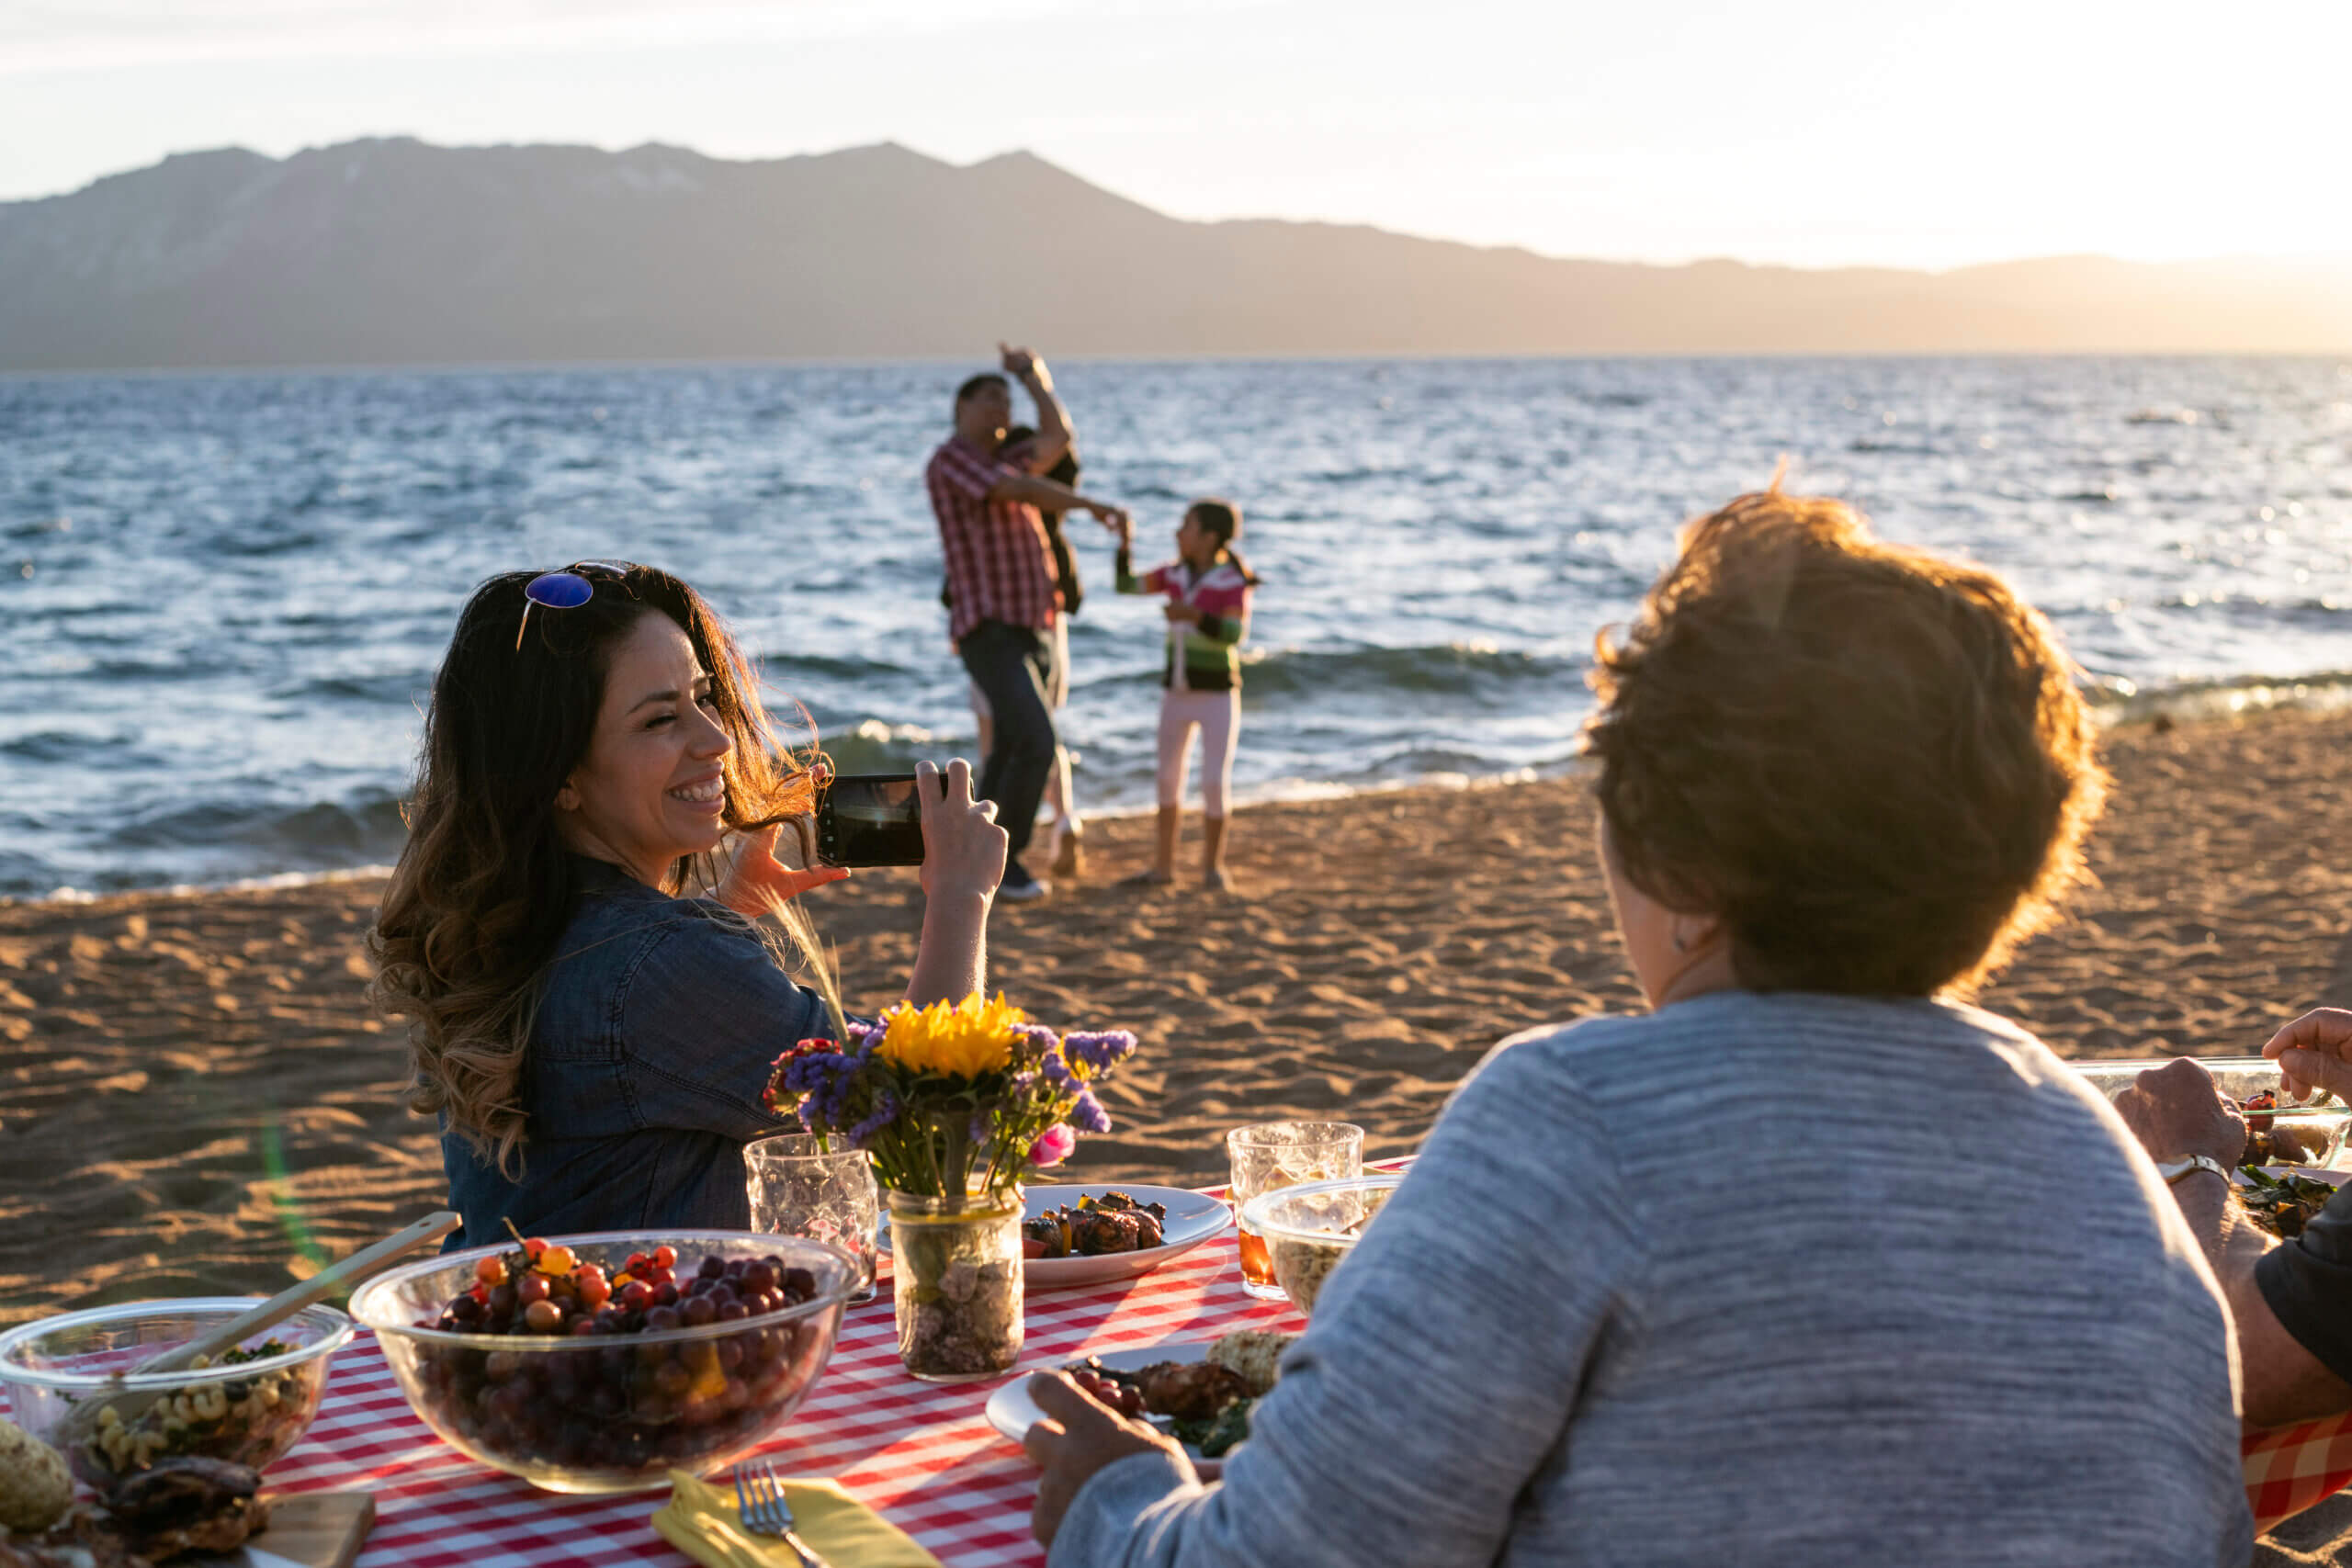 The Best Way to Spend Memorial Day Weekend in South Lake Tahoe